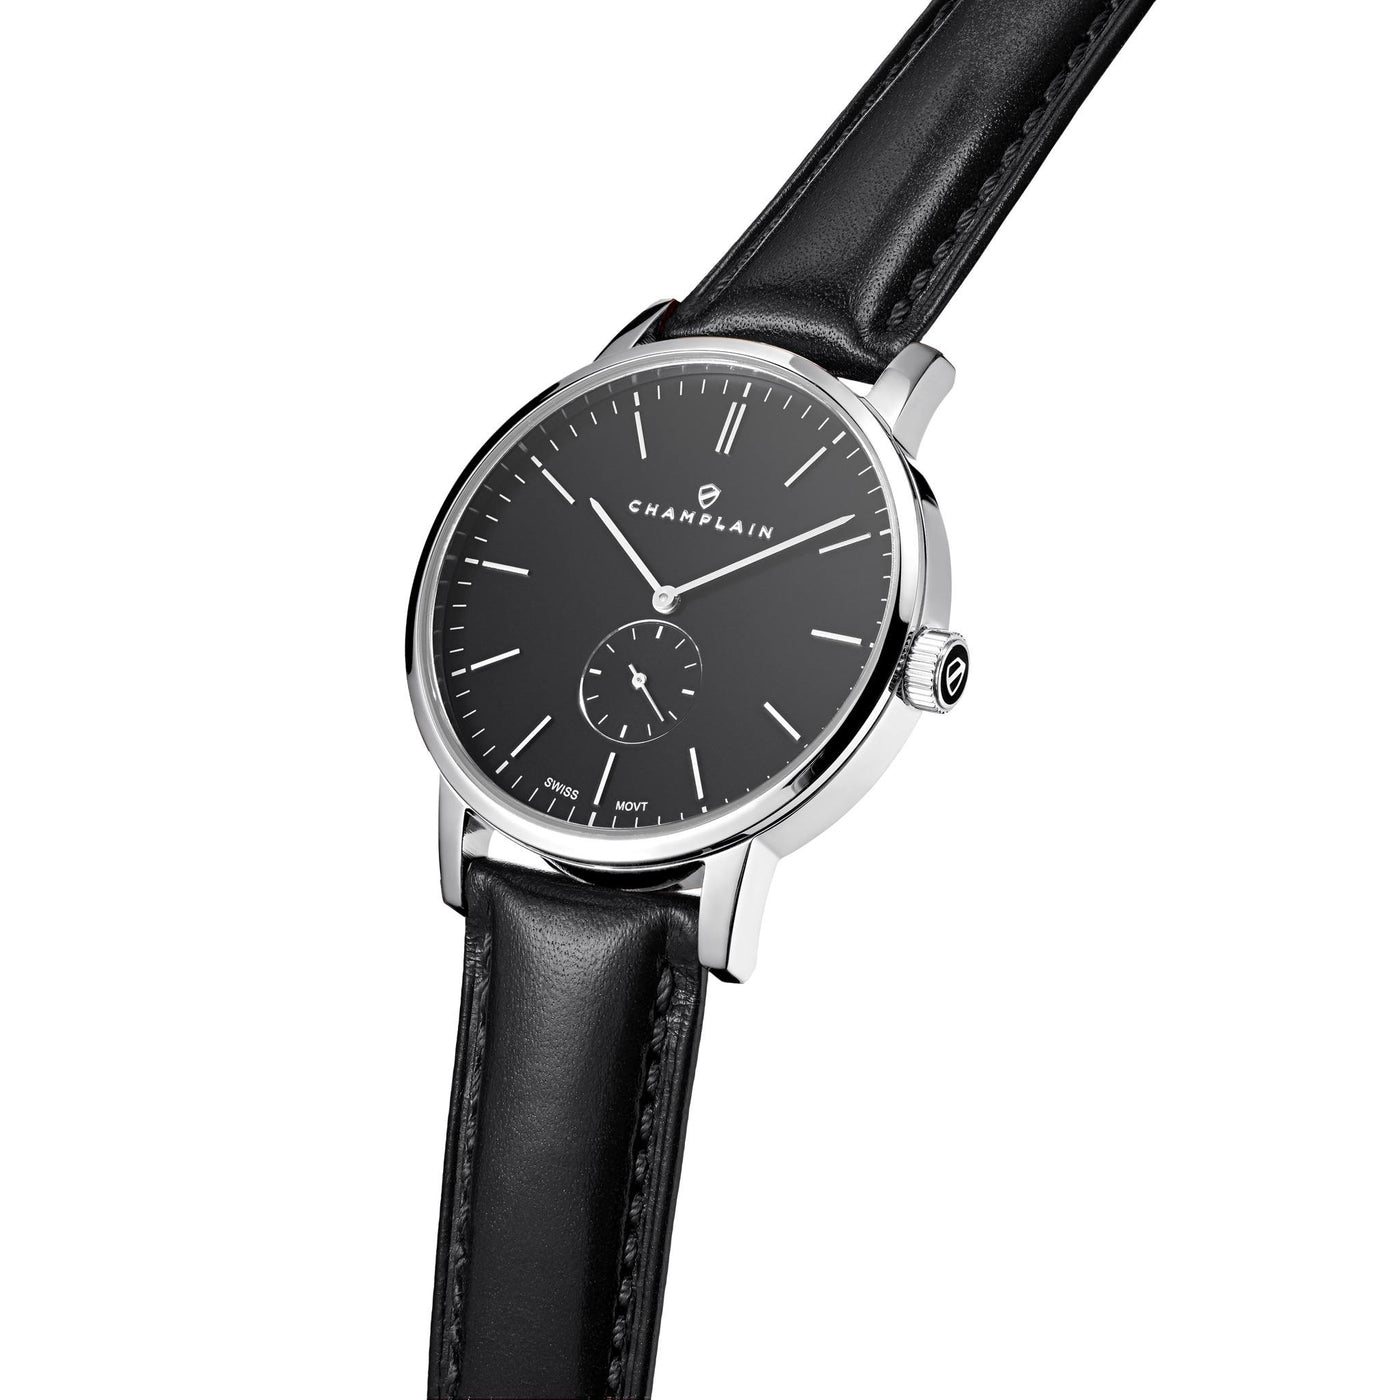 Silver/Black - Black Governor Watch by Champlain